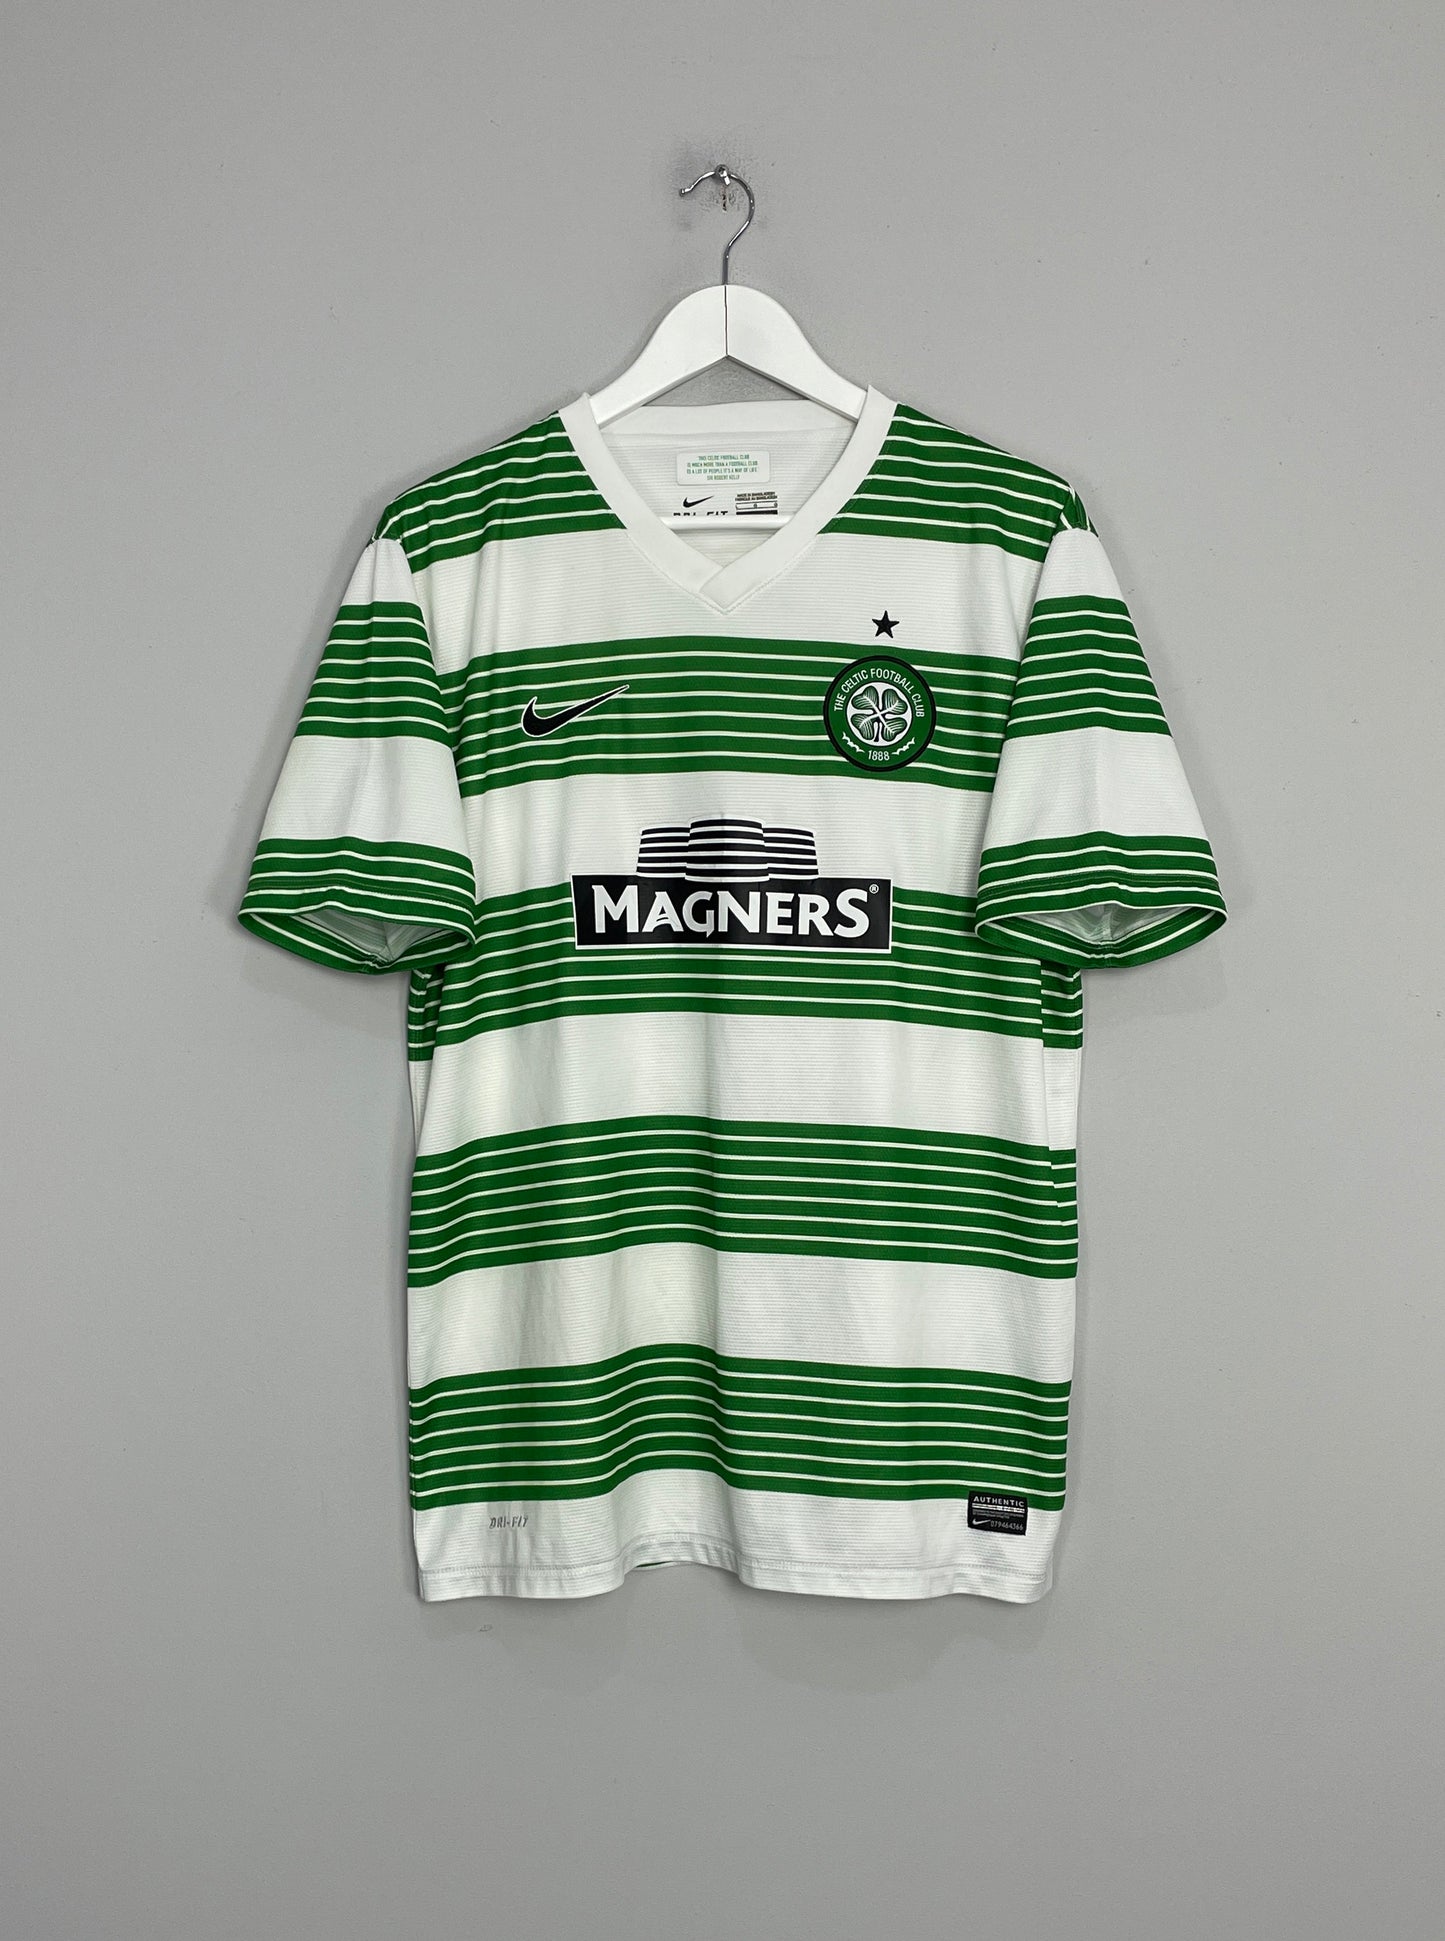 Image of the Celtic shirt from the 2014/15 season